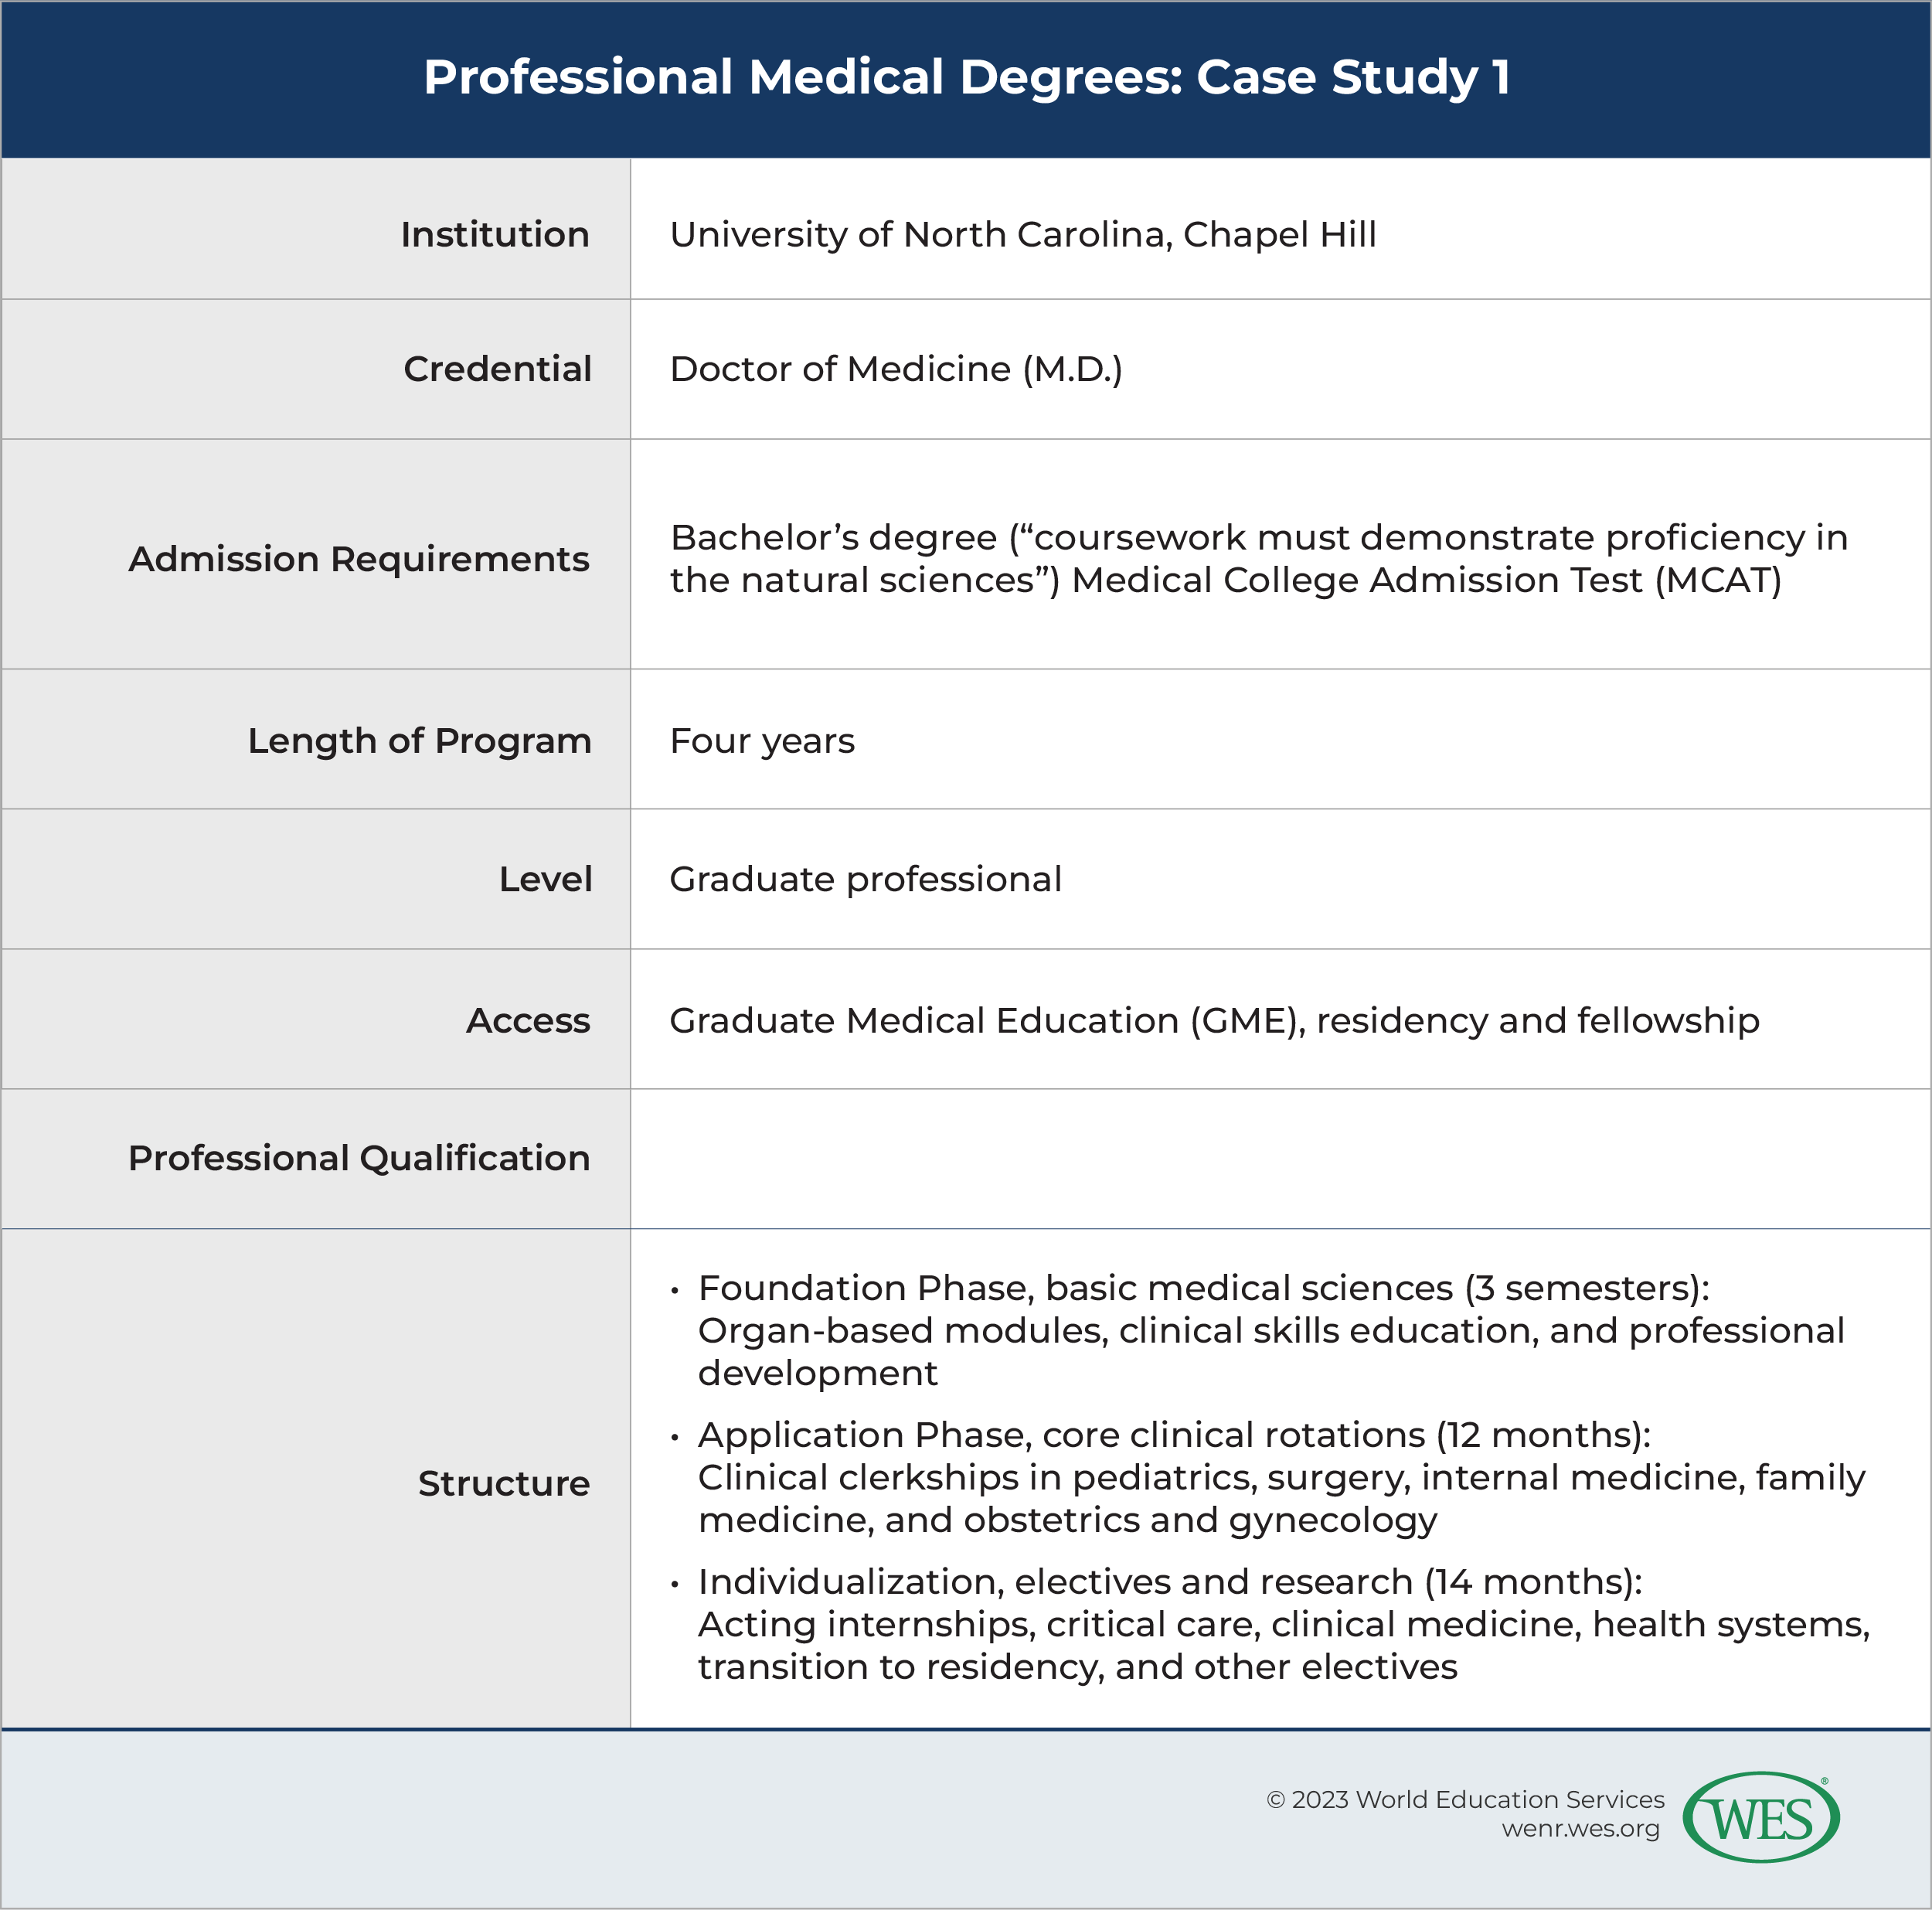 A table outlining key details of a Doctor of Medicine (M.D.) program at the University of North Carolina, Chapel Hill. 